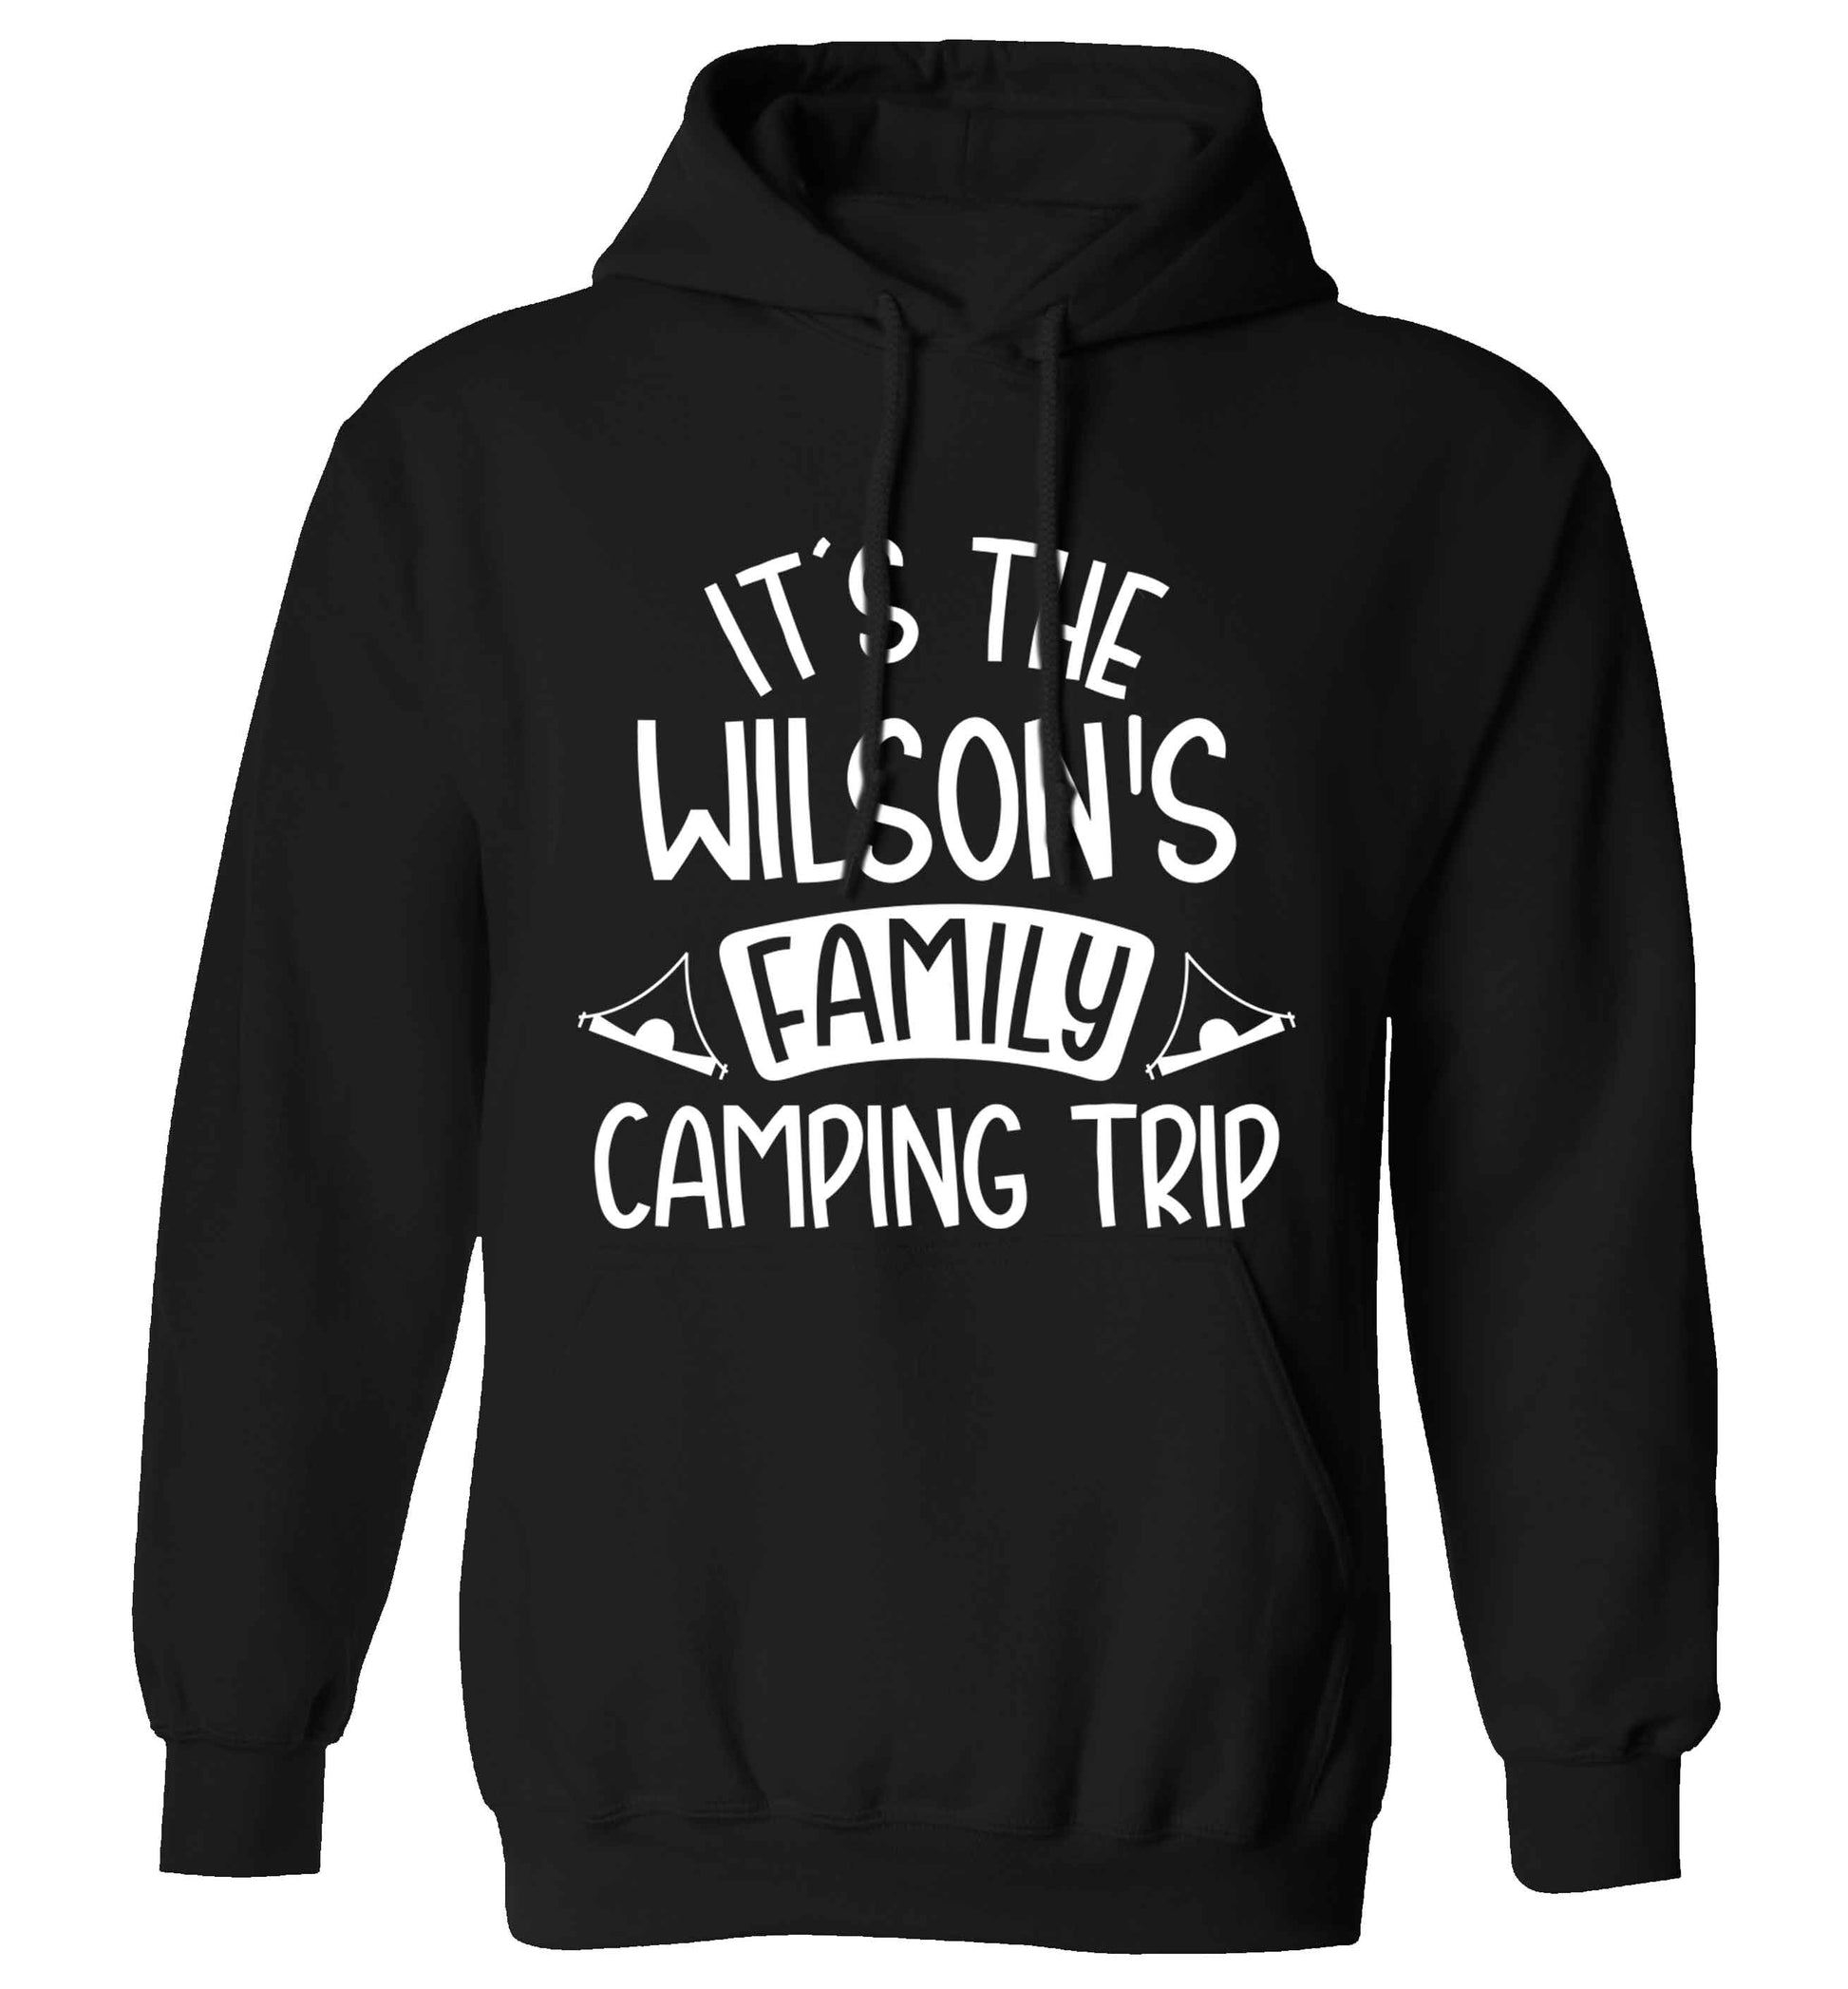 It's the Wilson's family camping trip personalised adults unisex black hoodie 2XL